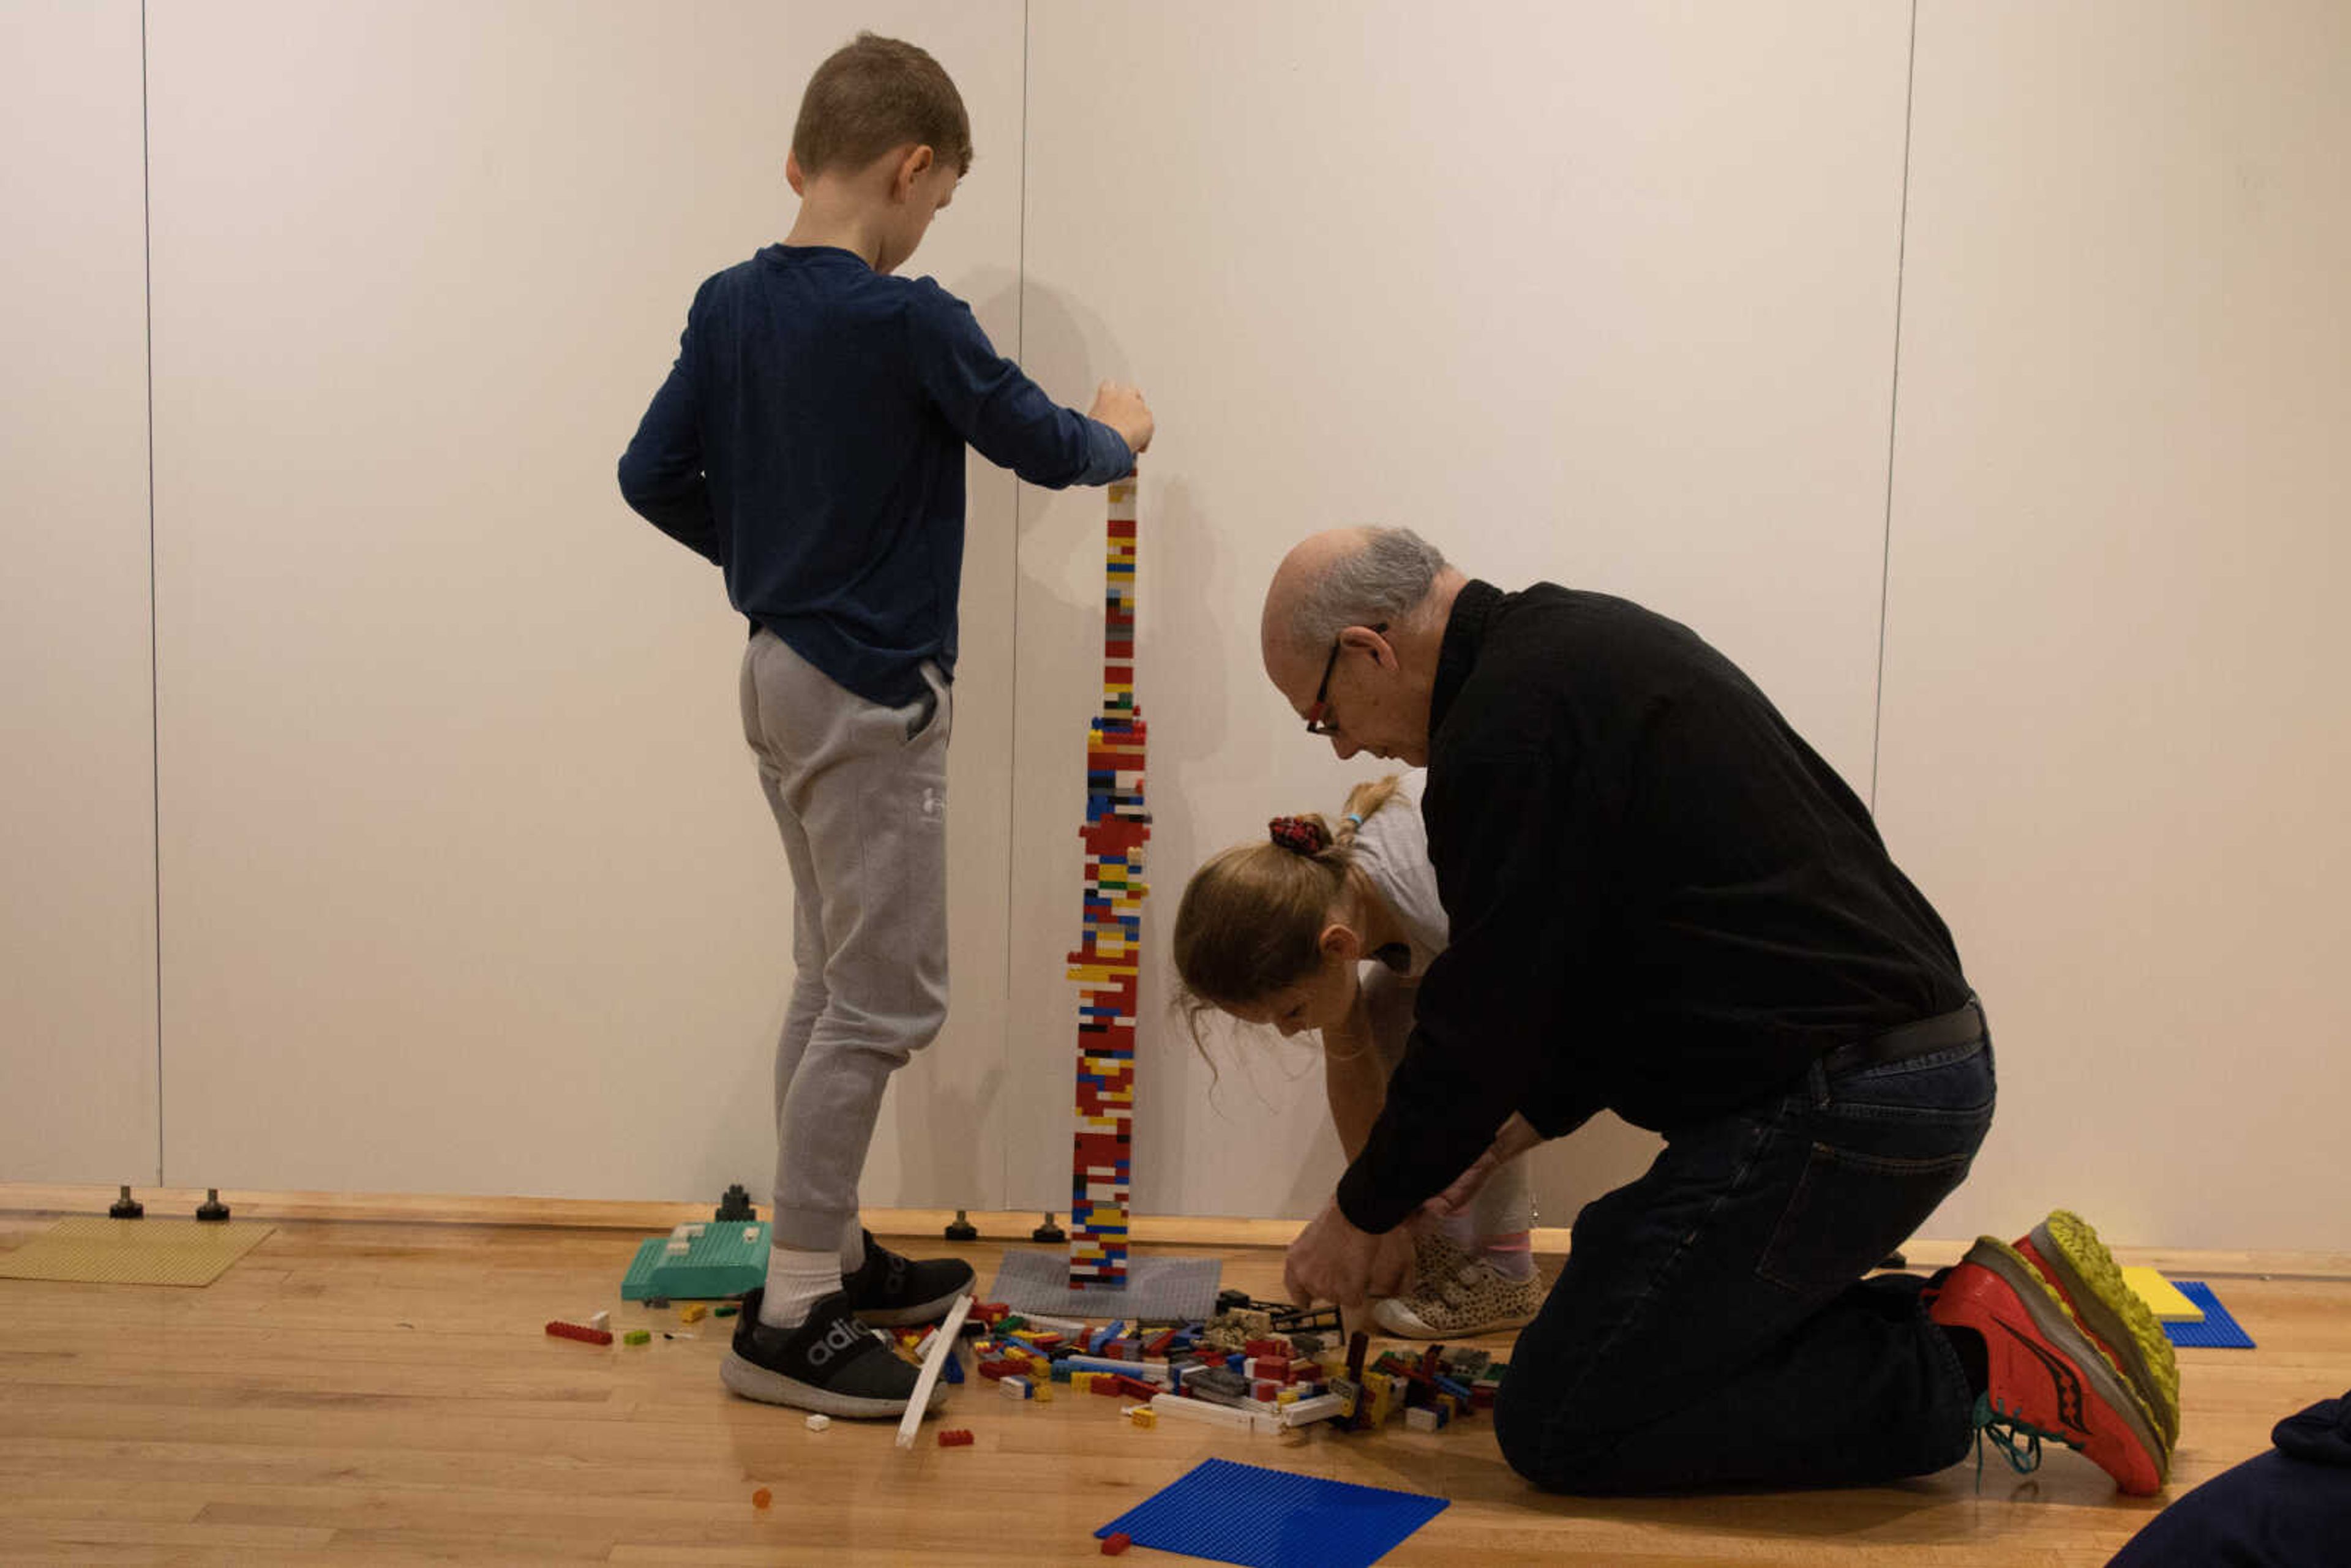 SEMO celebrates Lego’s 65th birthday with Lego Family Weekend event